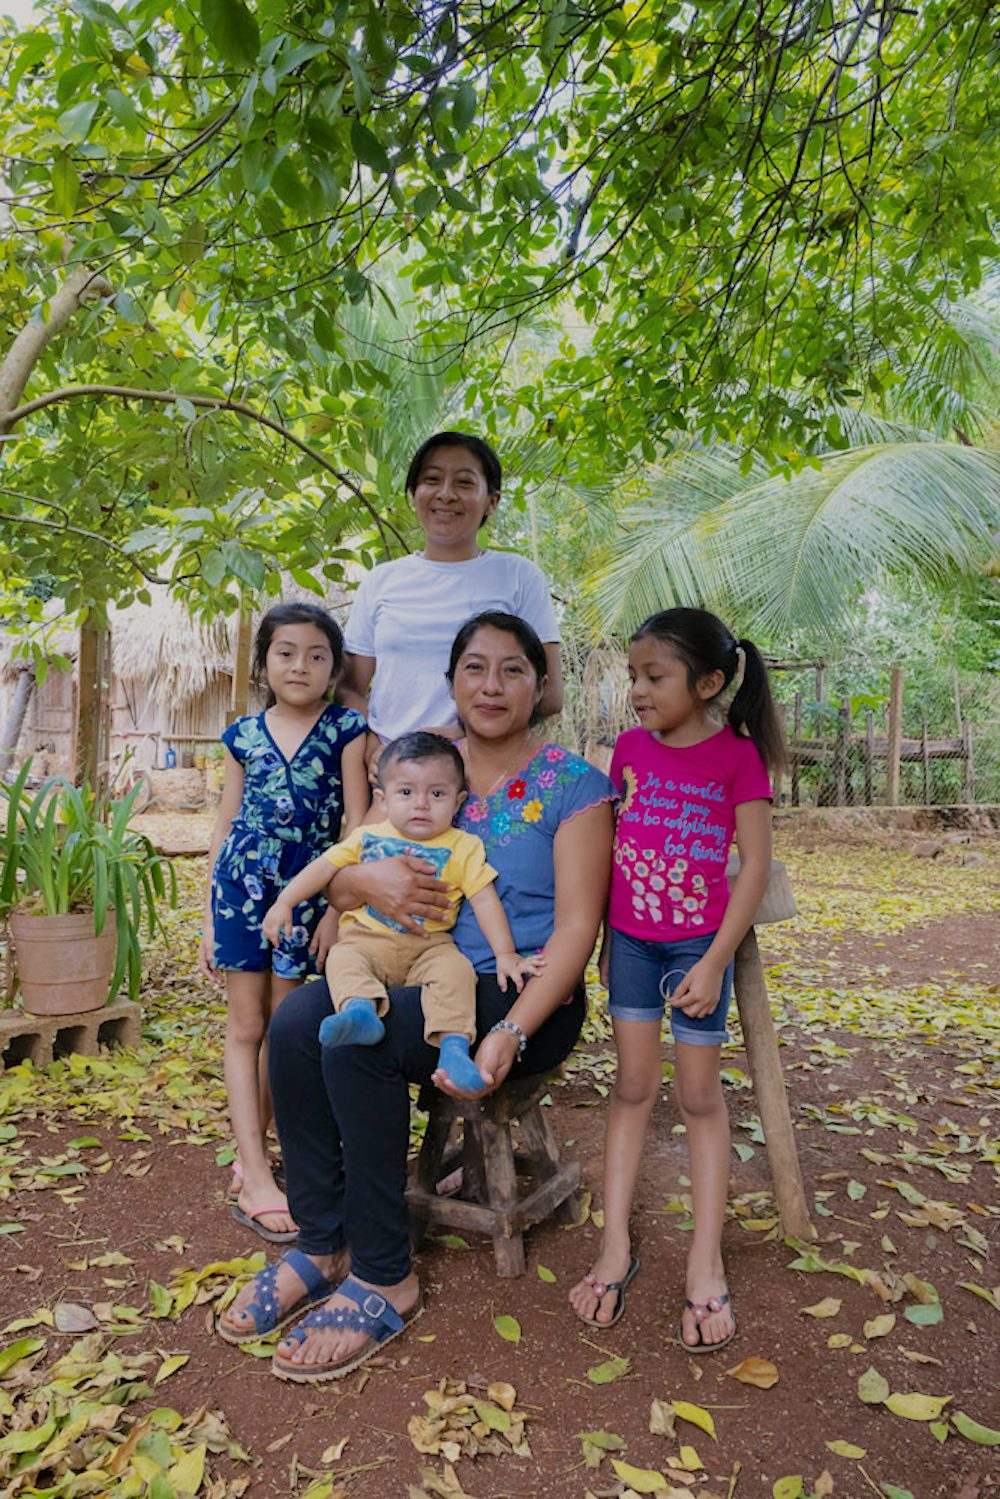 Two women and three children pose under a green tree.